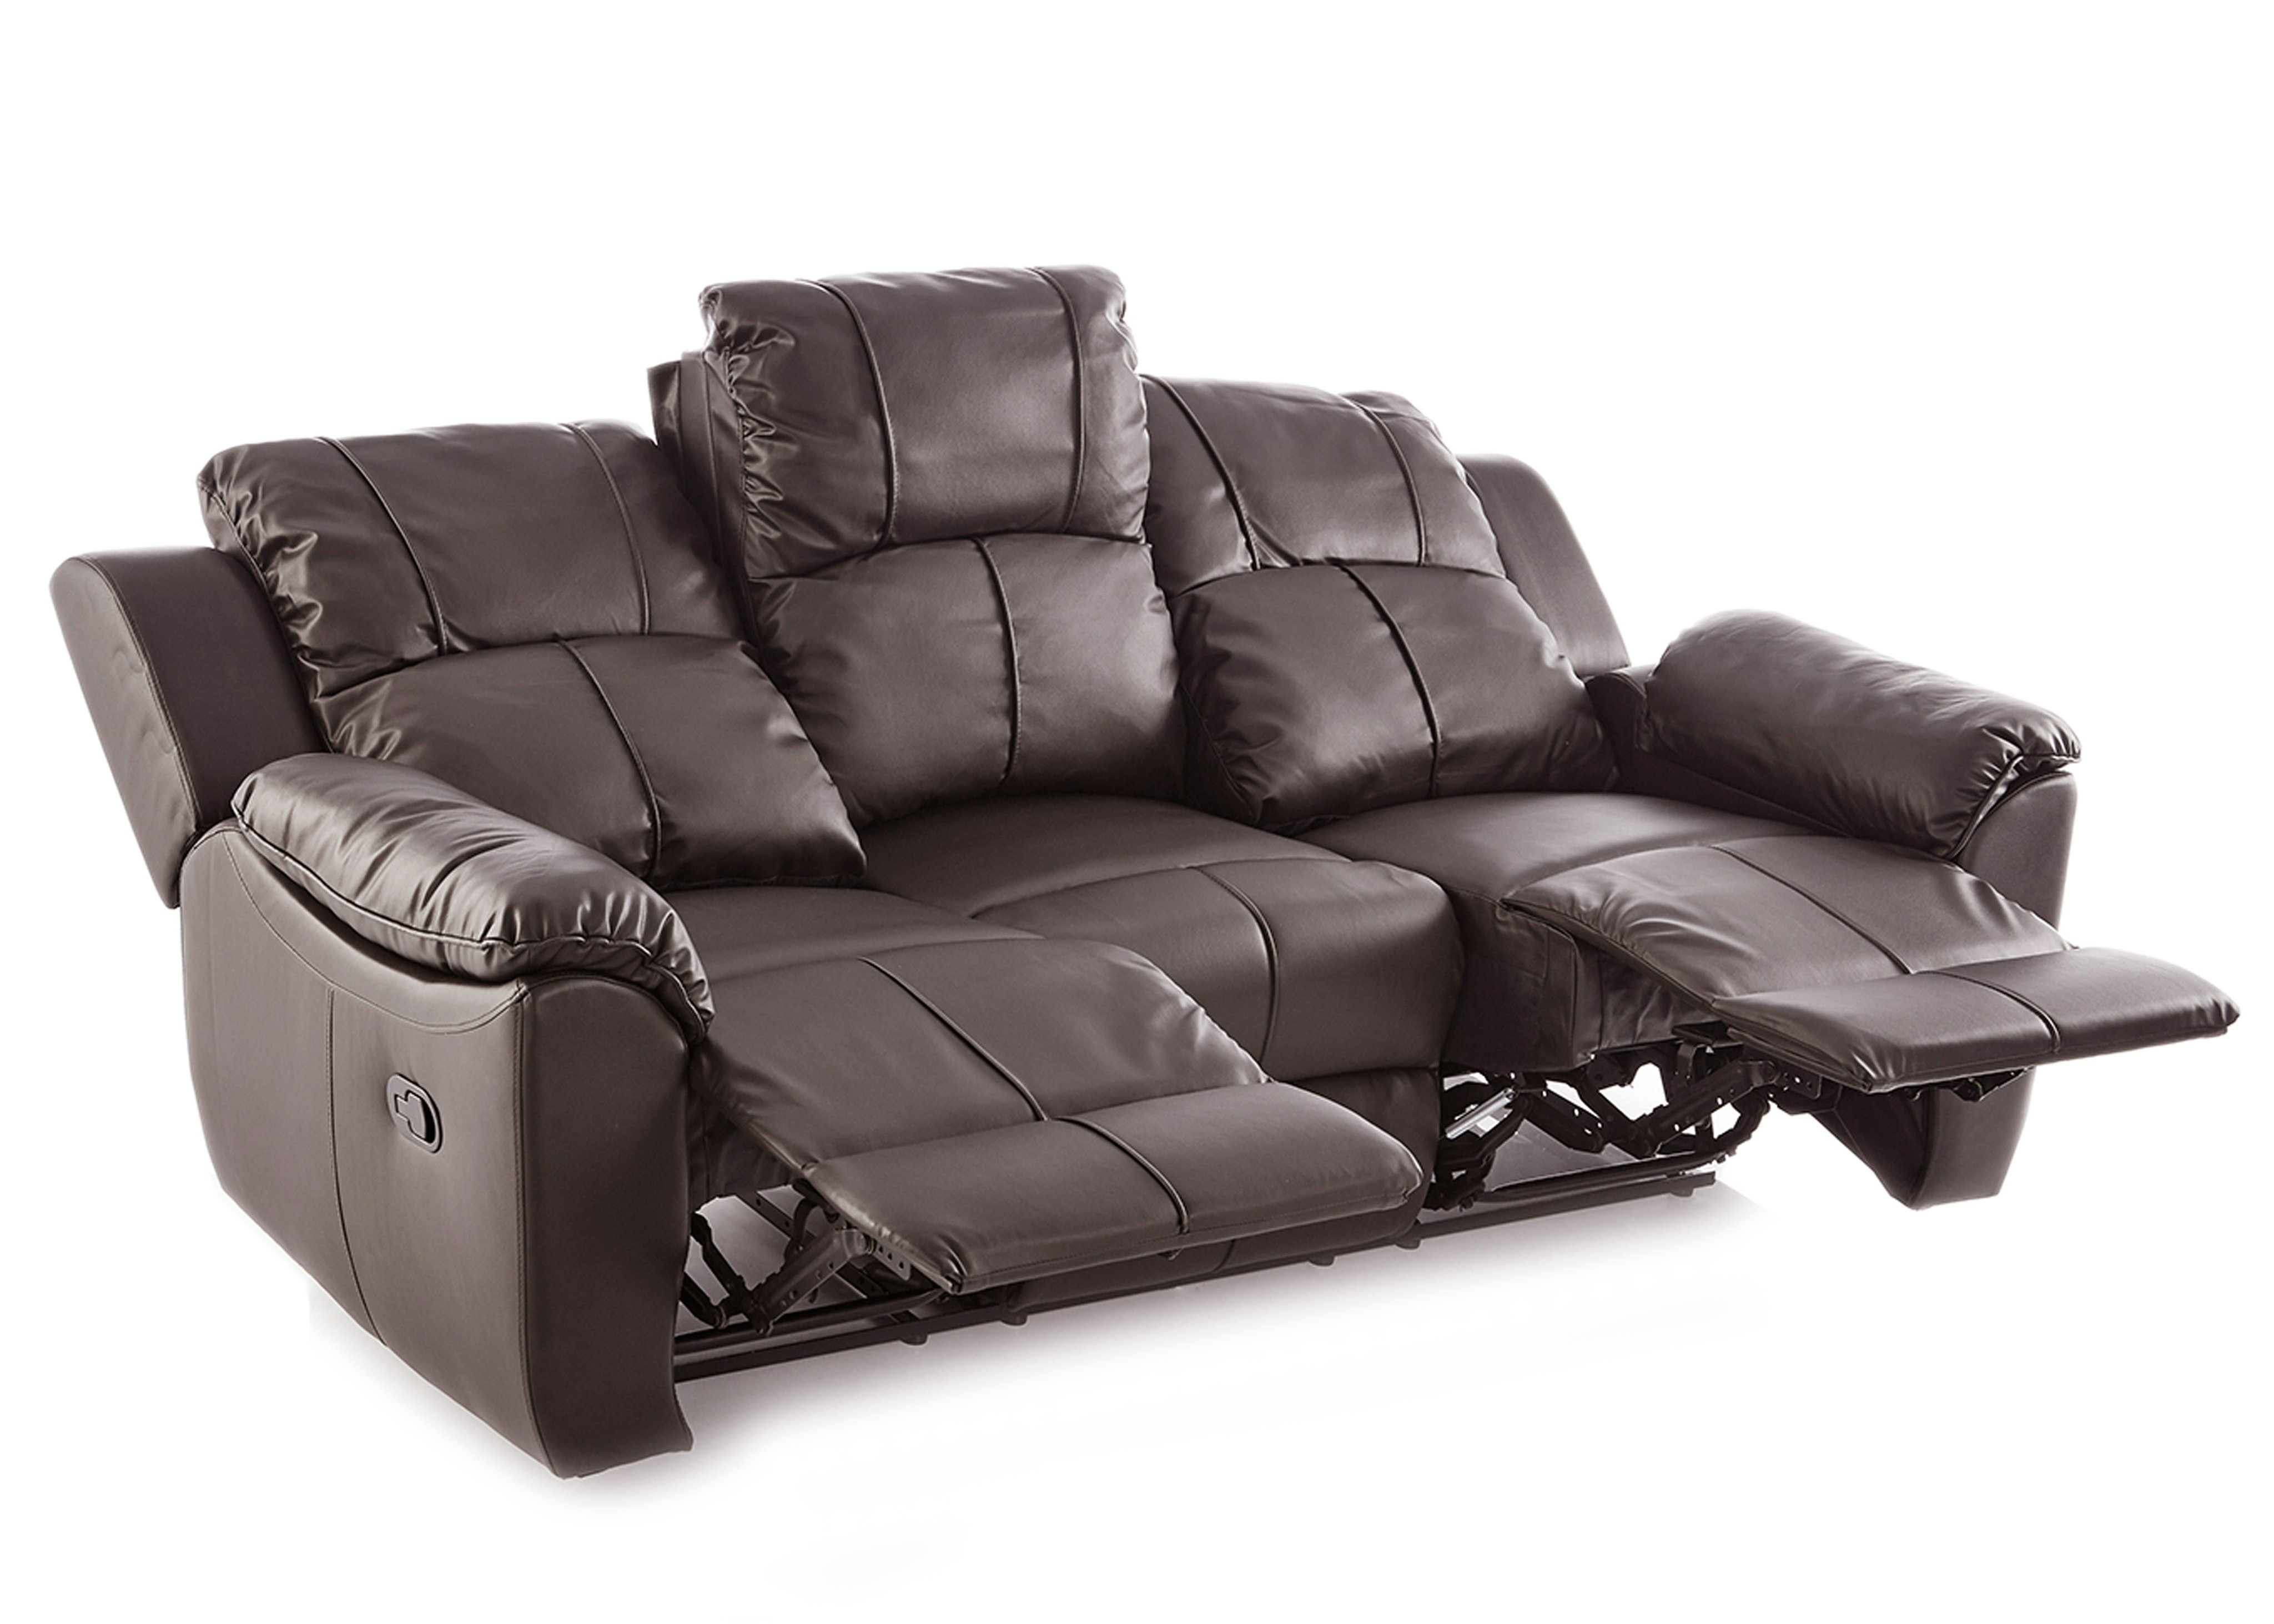 Sofa recliner ... islington recliner - sofa club - cheap sofa - fast delivery - MUSYGXE